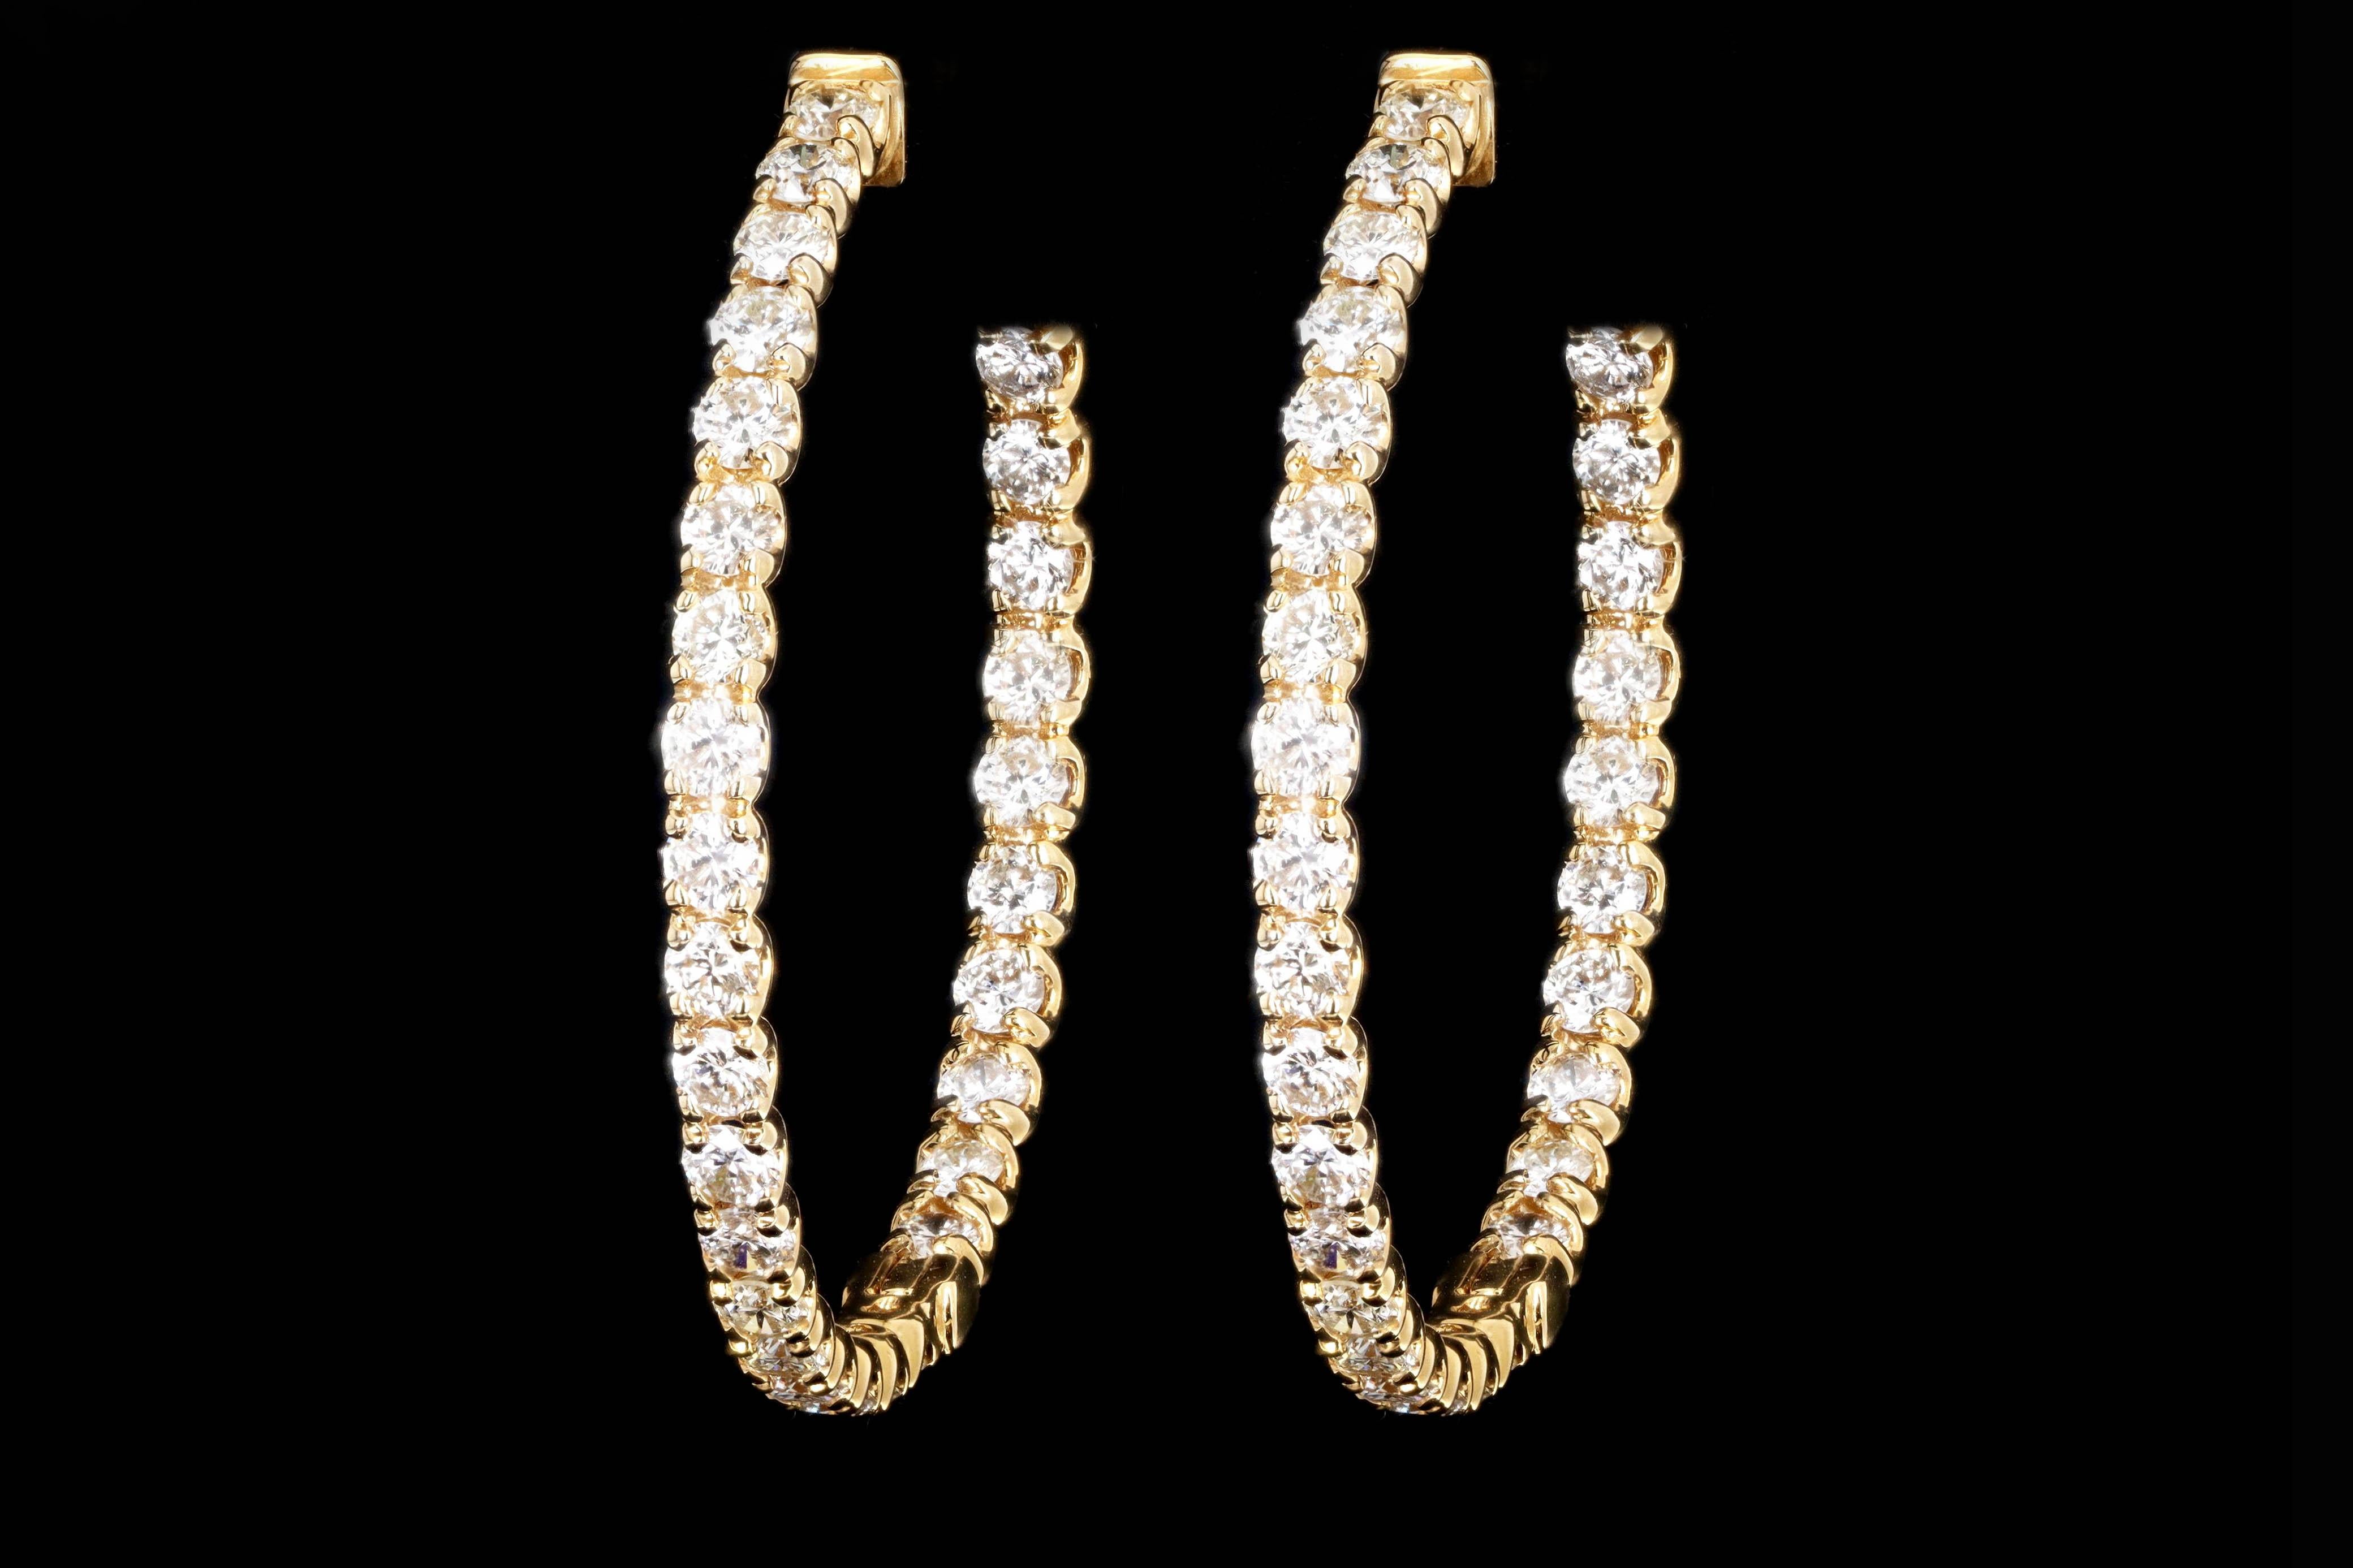 Era: New

Composition: 14K Yellow Gold

Primary Stone: Sixty Two Round Brilliant Cut Diamonds

Total Carat Weight: Approximately 5.40 Carats 

Color/Clarity: G/H - SI1/2

Earring Diameter: 1.5 Inches

Earring Weight: 12.5 Grams

Item Barcode: 128923